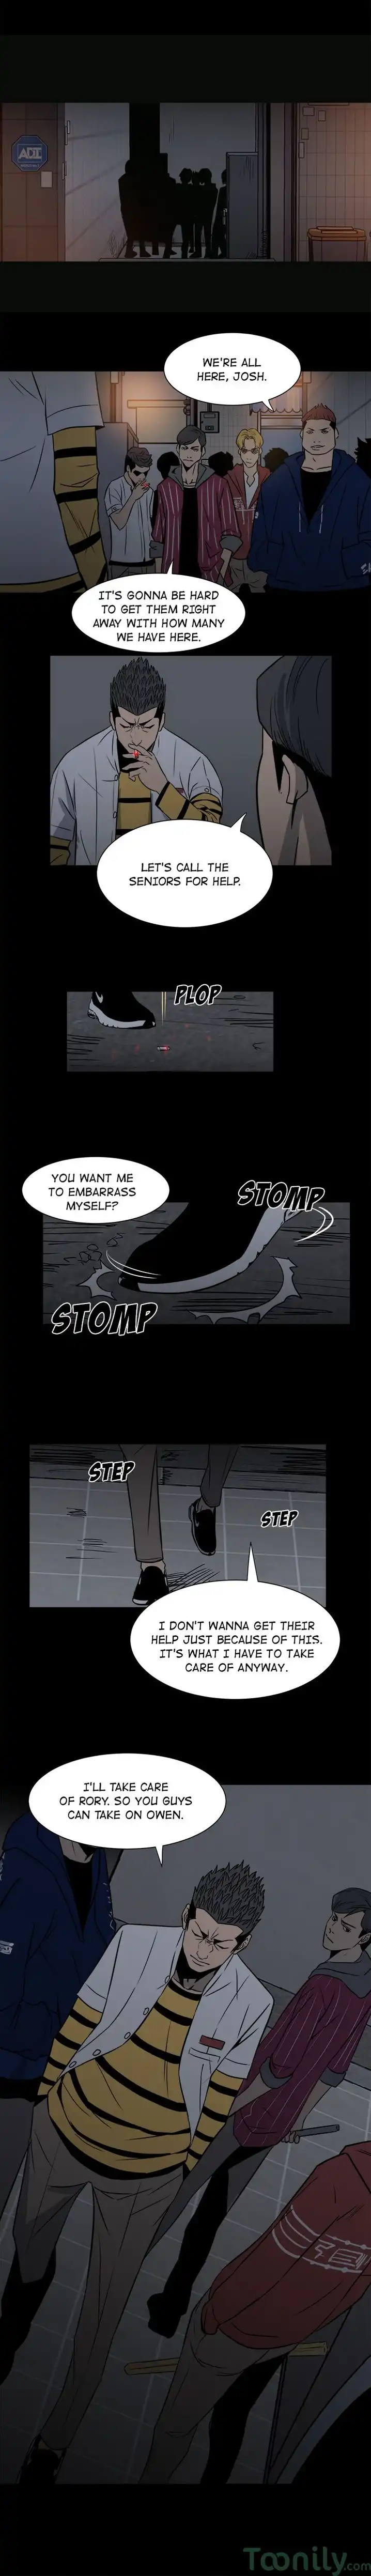 The Villain - Chapter 5 Page 4